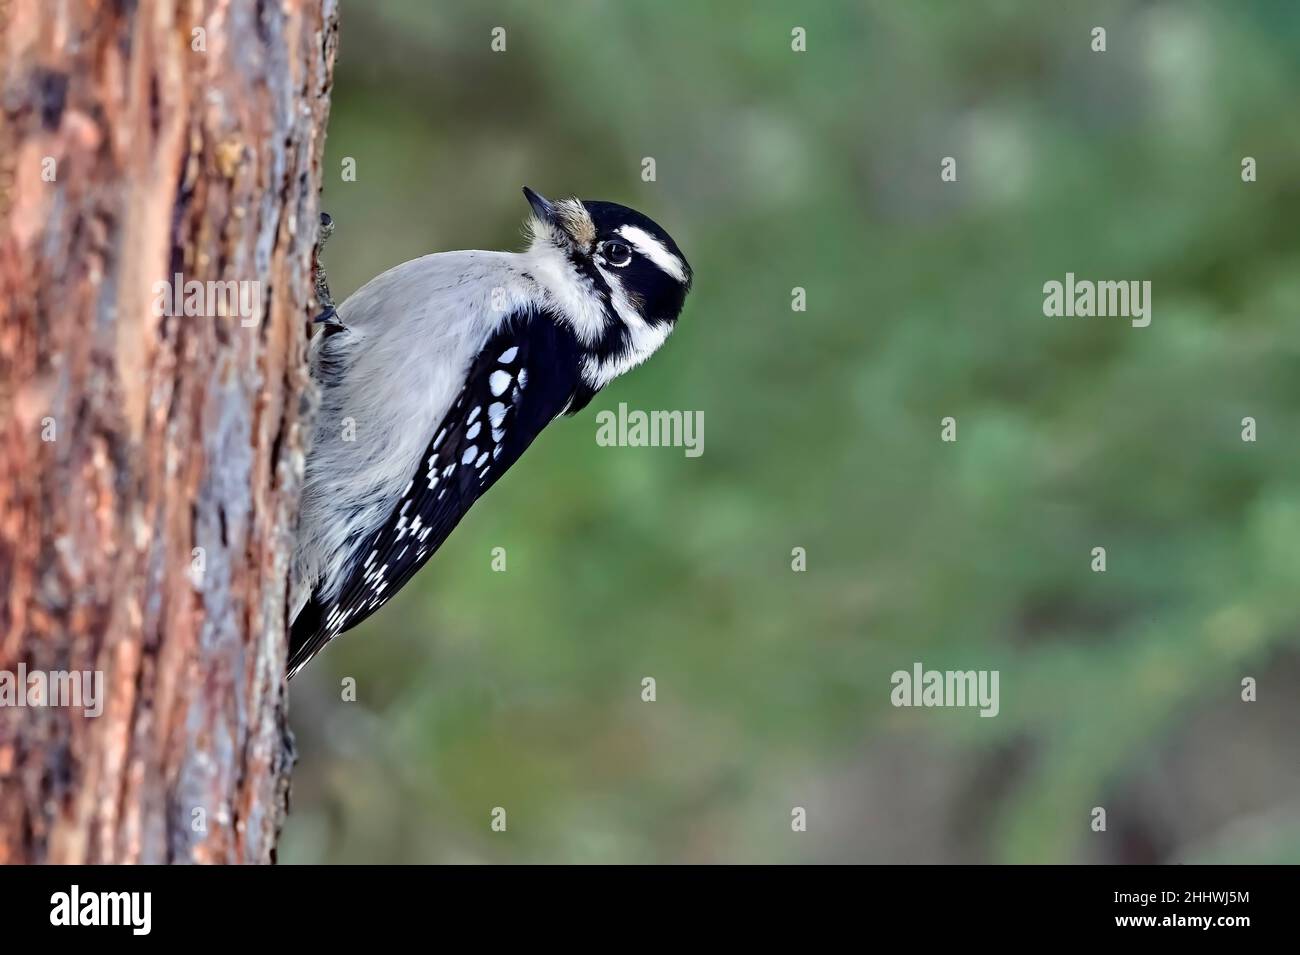 A Downey woodpecker Picoides pubescens; walking up a tree trunk foraging for insects in rural Alberta Canada. Stock Photo